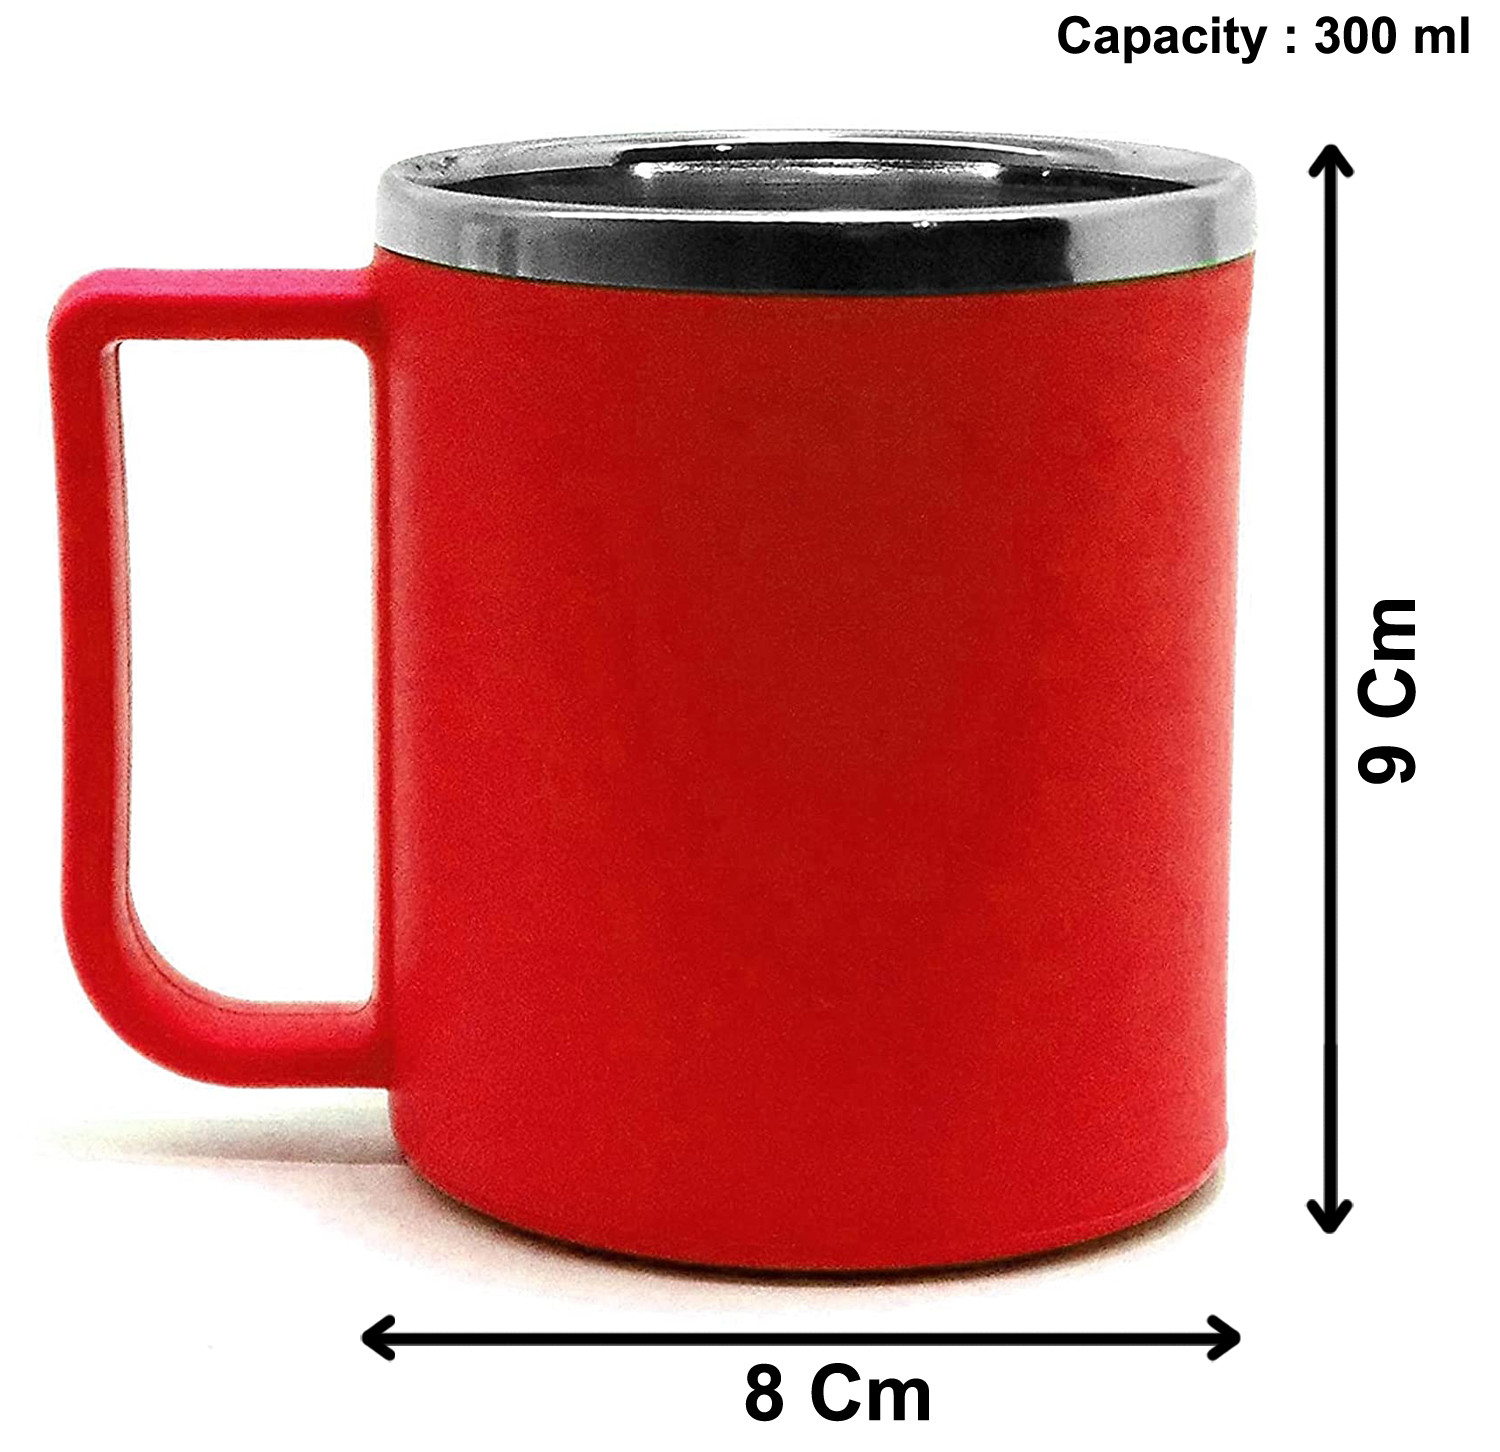 Kuber Industries Medium Size Plastic Steel Cups for Coffee Tea Cocoa, Camping Mugs with Handle, Portable & Easy Clean,(Red & Orange)